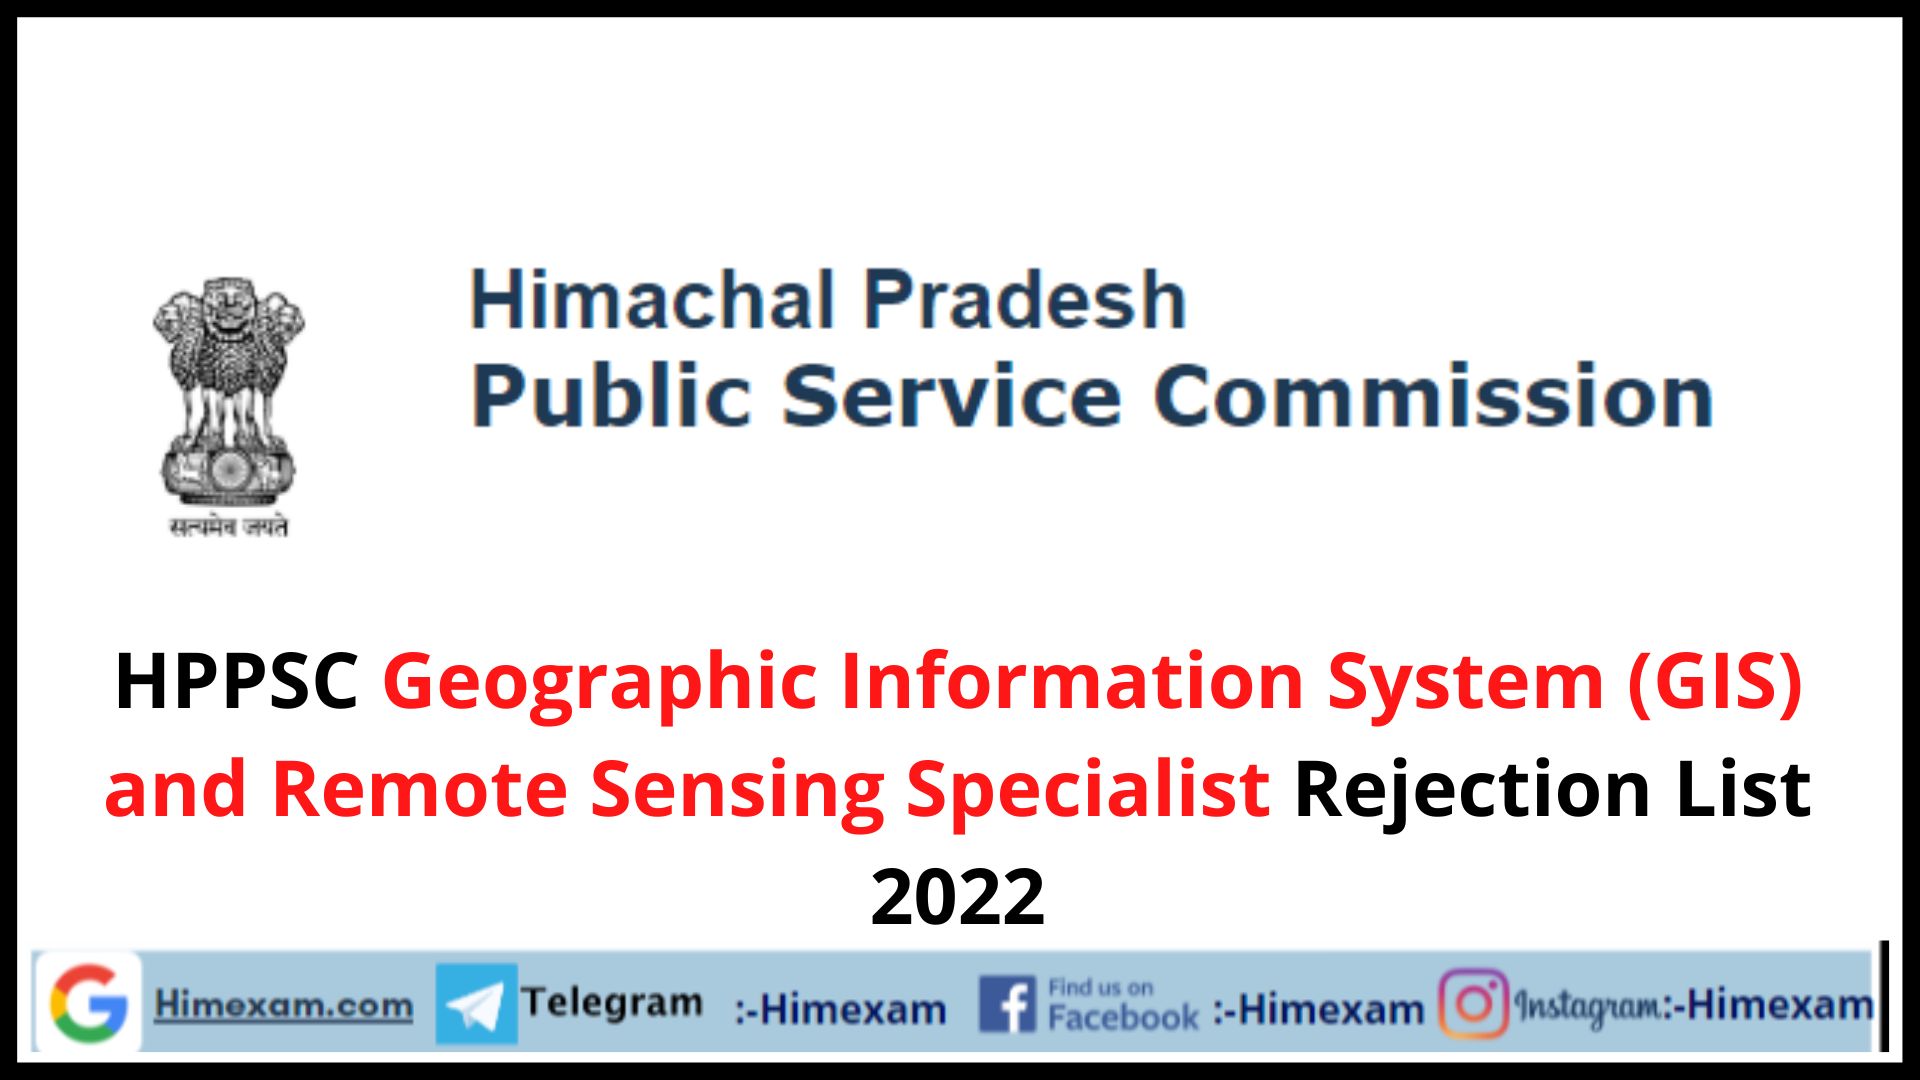 HPPSC Geographic Information System (GIS) and Remote Sensing Specialist Rejection List 2022